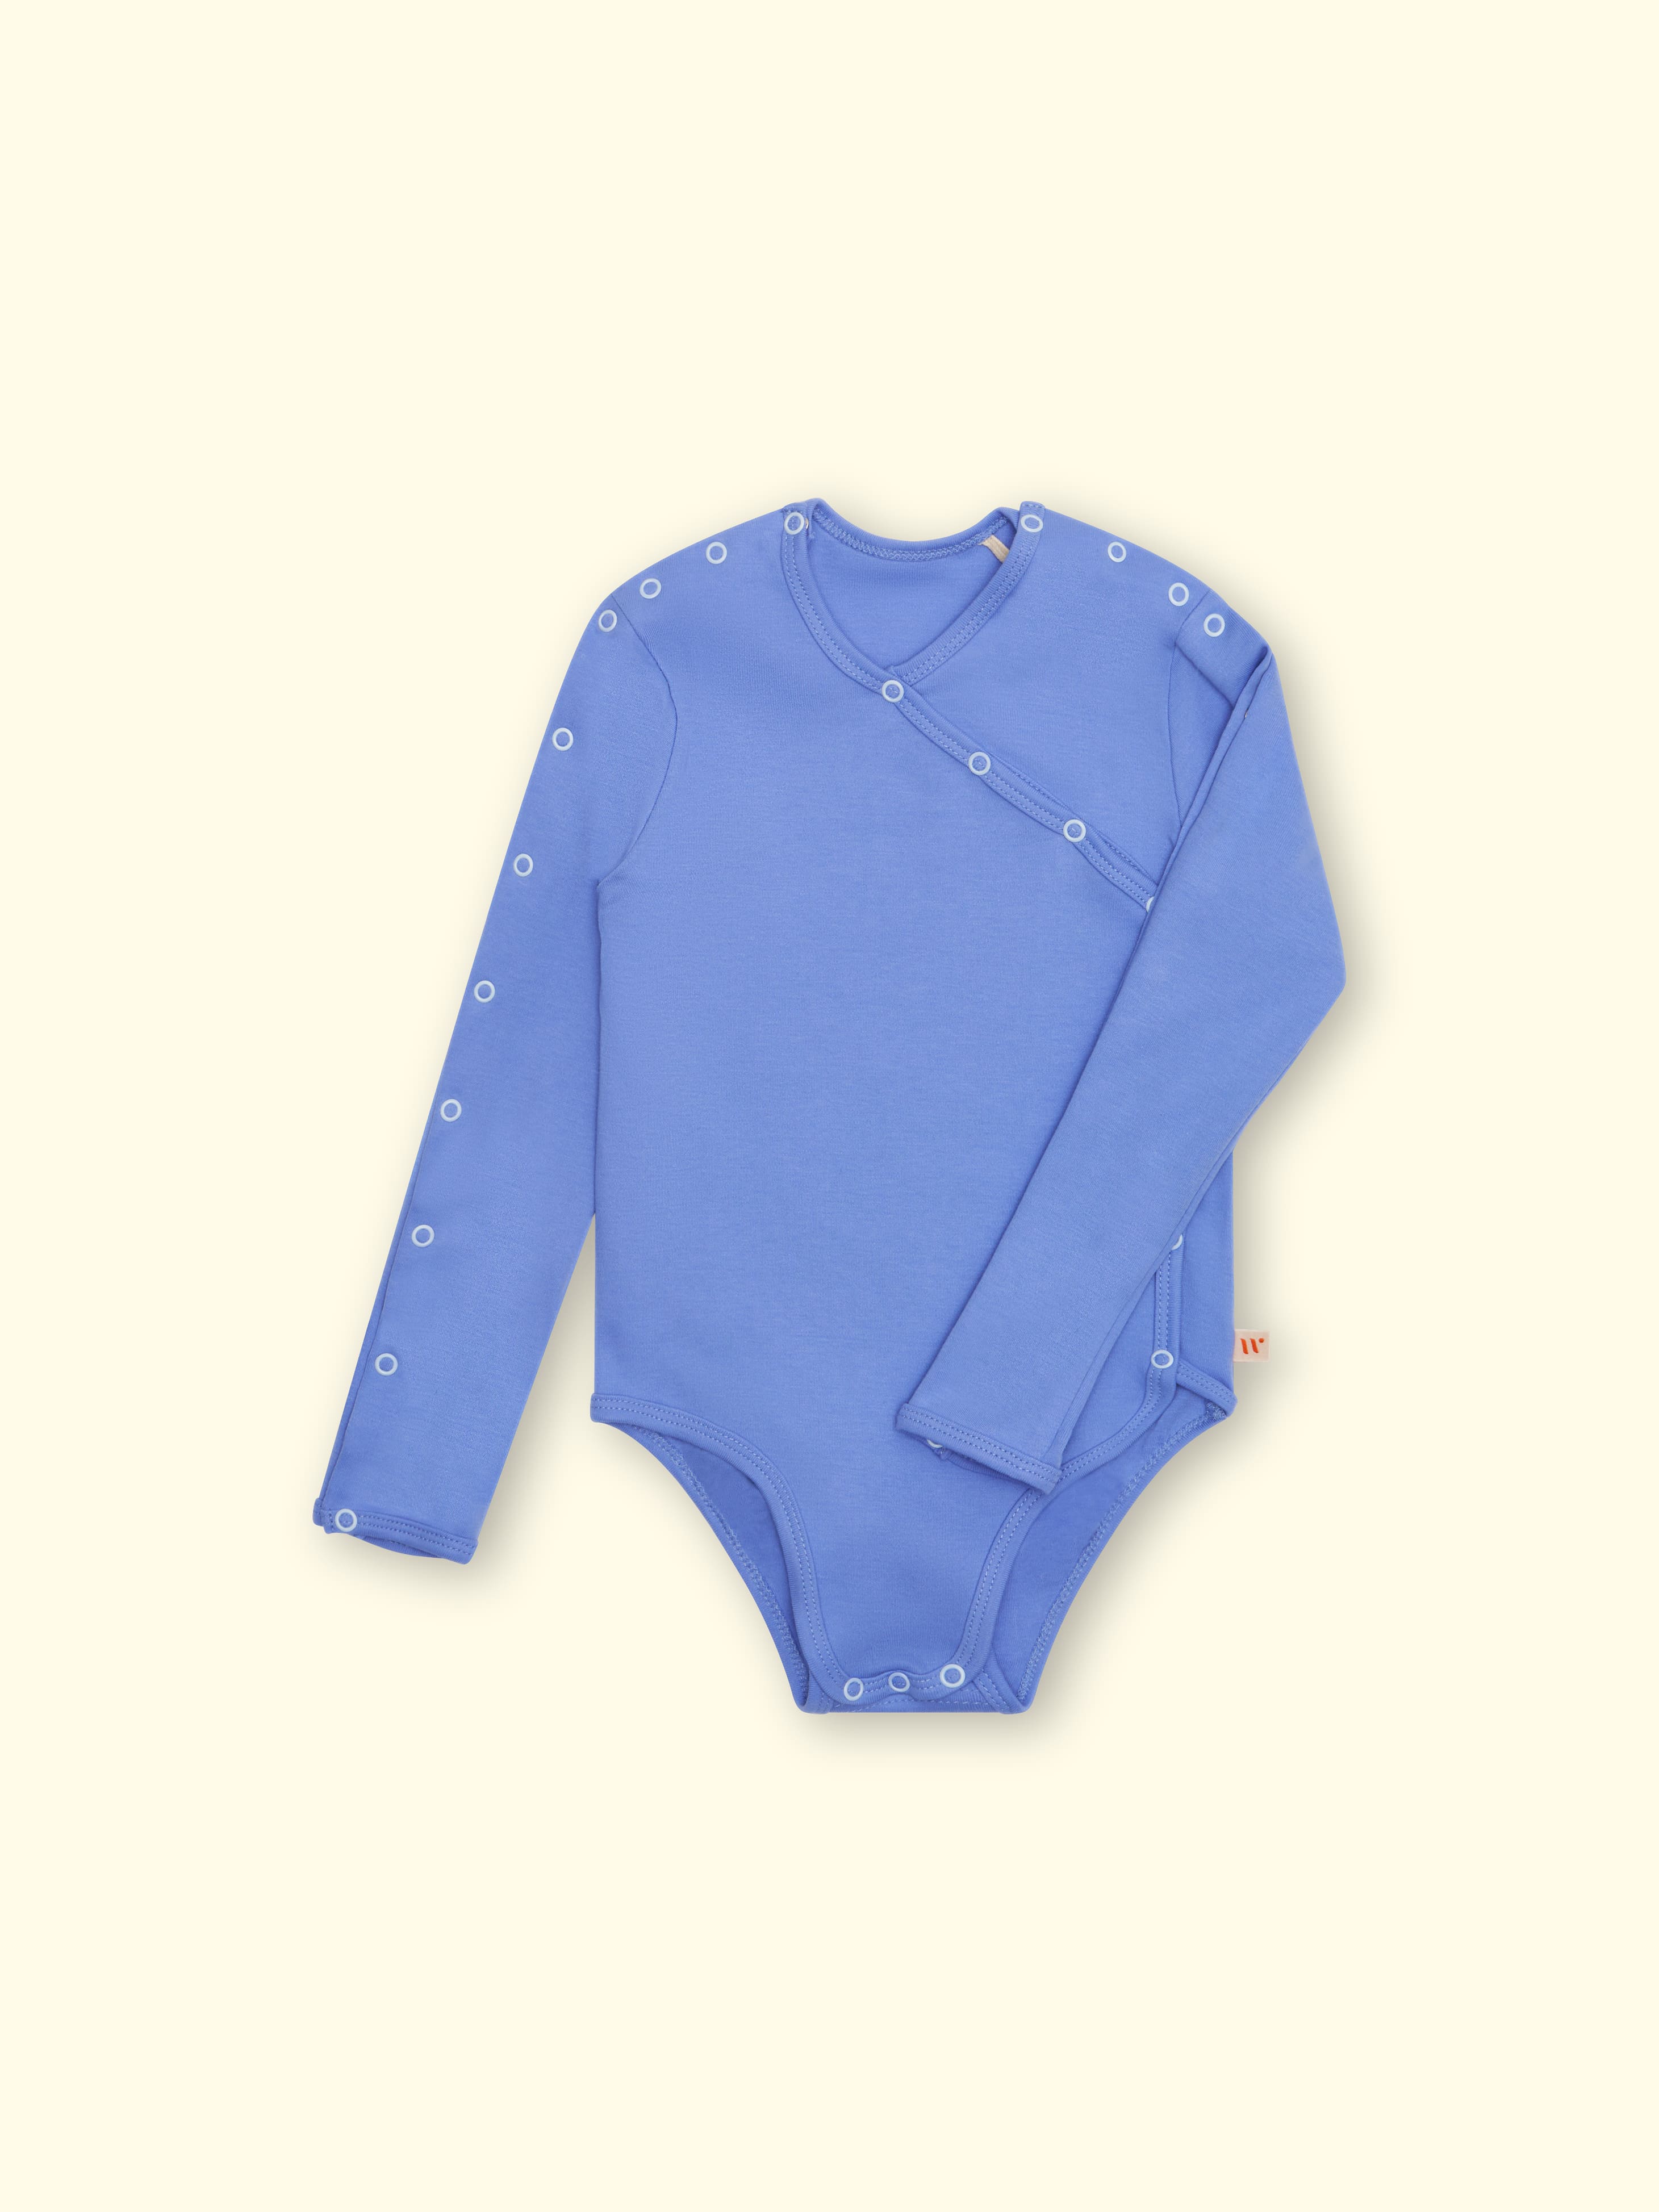 NEW - Probe body Large Charlotte - with sleeve opening, for children with medical care, up to size 140